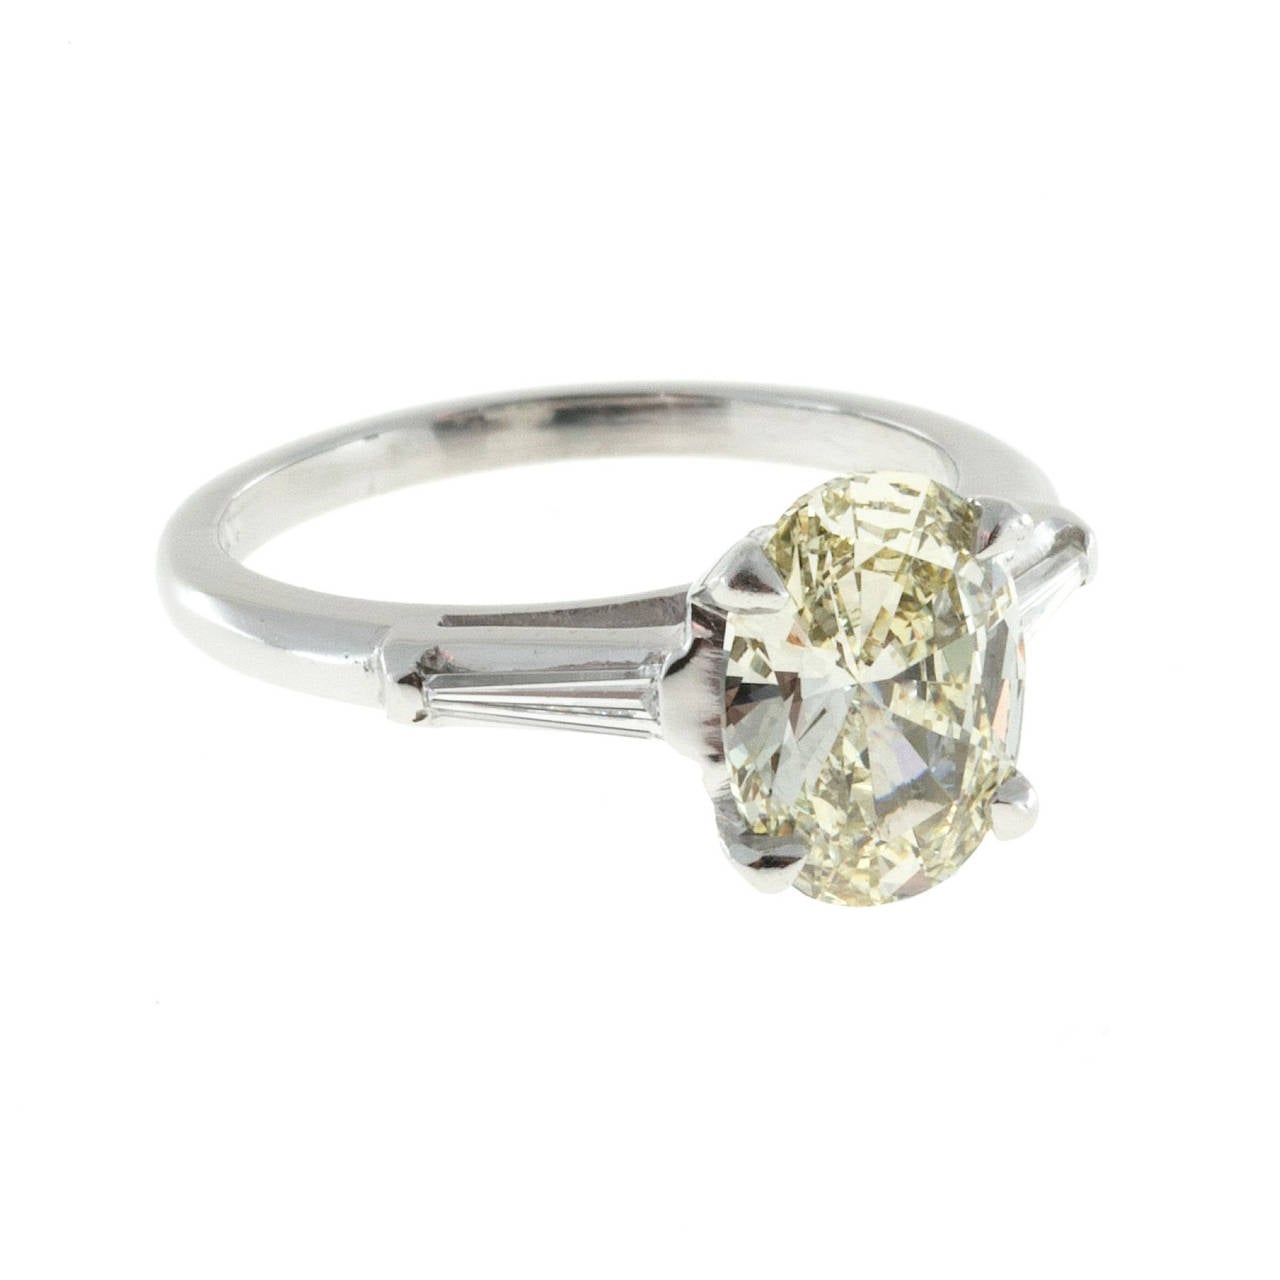 Bright fancy light yellow oval diamond in a classic baguette Platinum ring.

1 GIA certified# 2135723862 oval diamond, approx. total weight 1.72cts natural fancy light yellow, VVS2 clarity, 9.68 x 7.21 x 3.84mm, bright and sparkly
2 tapered